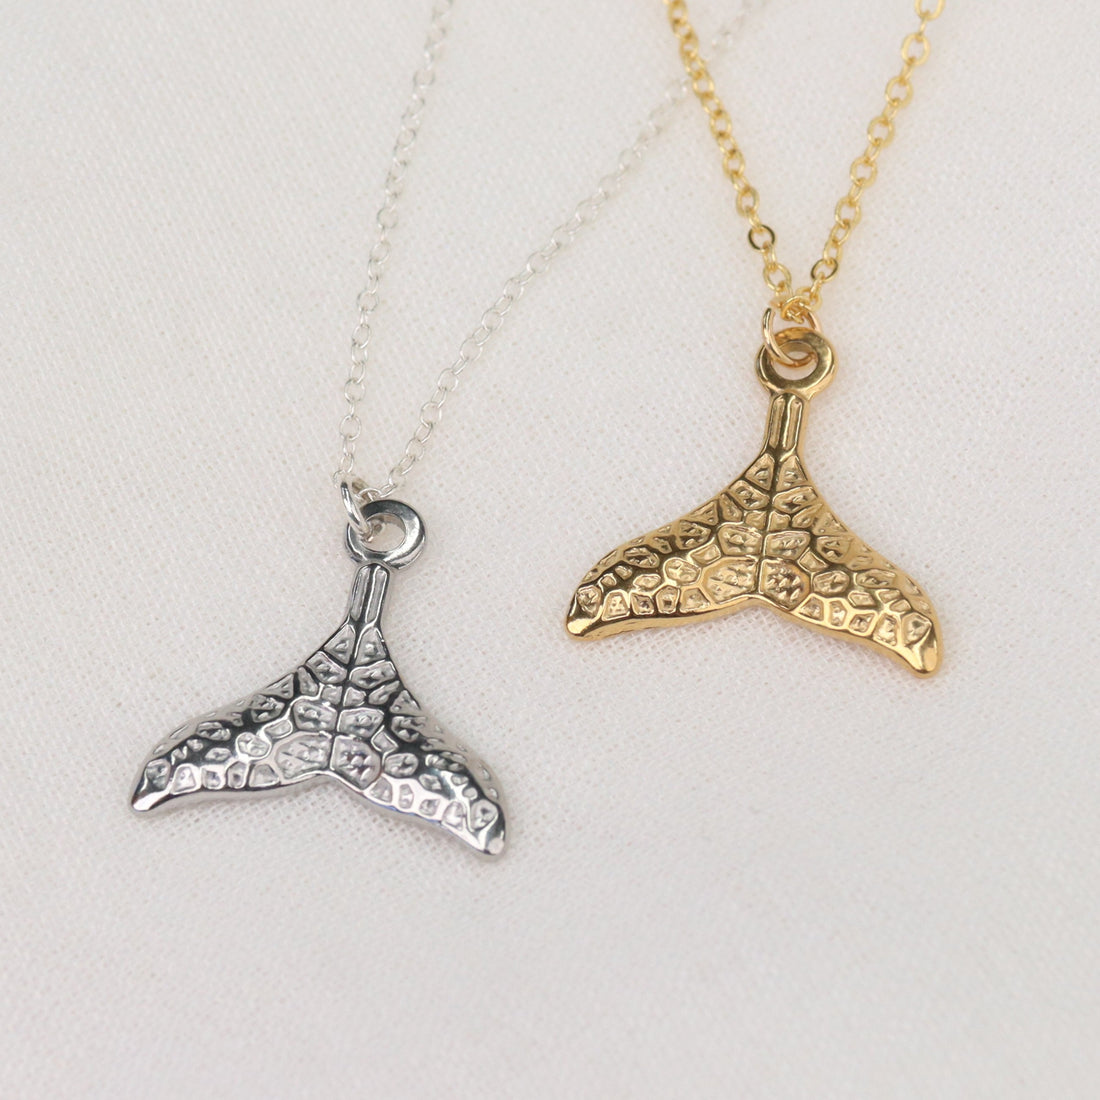 Sipadam | 18k Gold Plated or Sterling Silver Textured Whale Tale Pendant Necklace